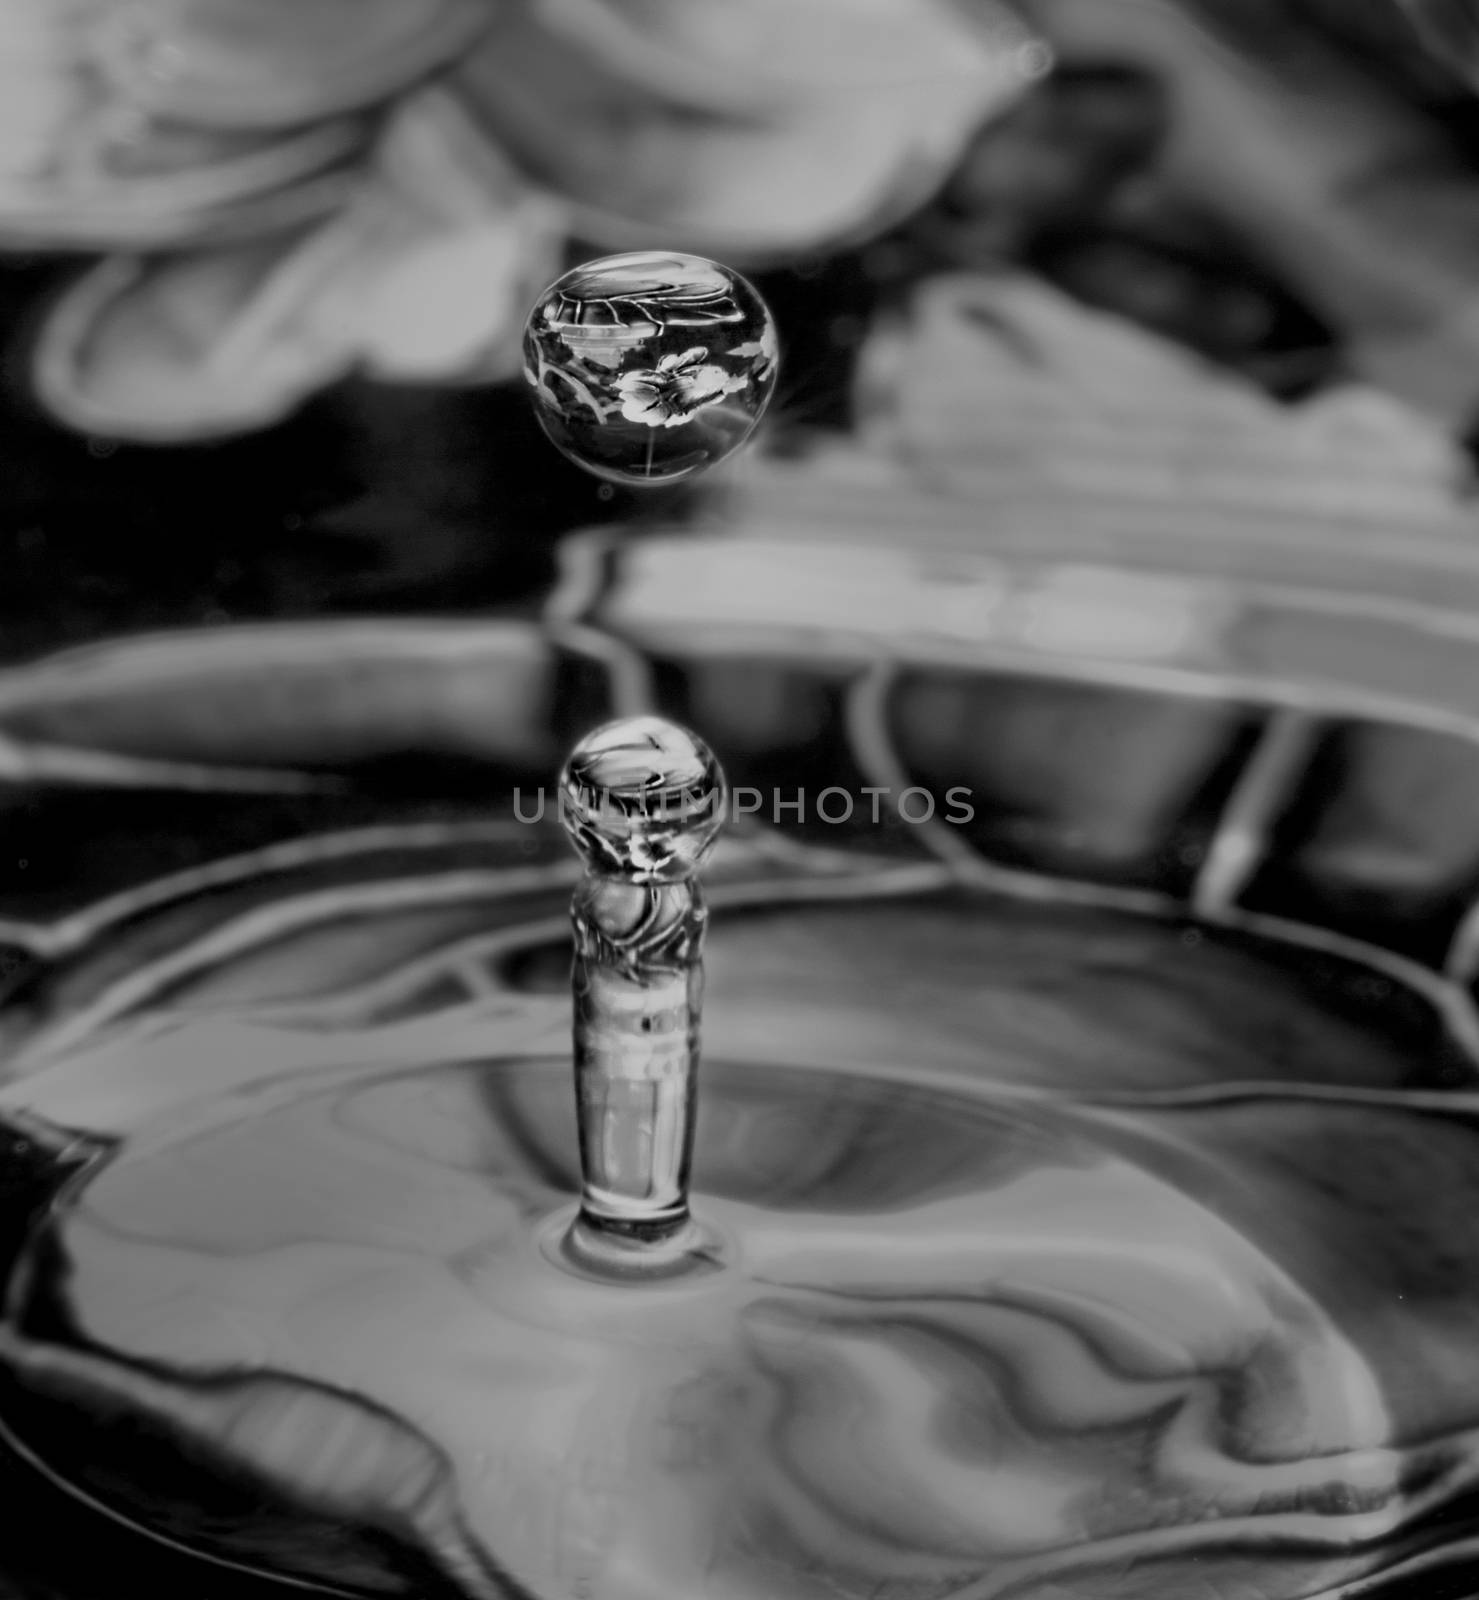 Two transparent water drops reflecting the surrounding floral pattern of the plate, monotone flash photography